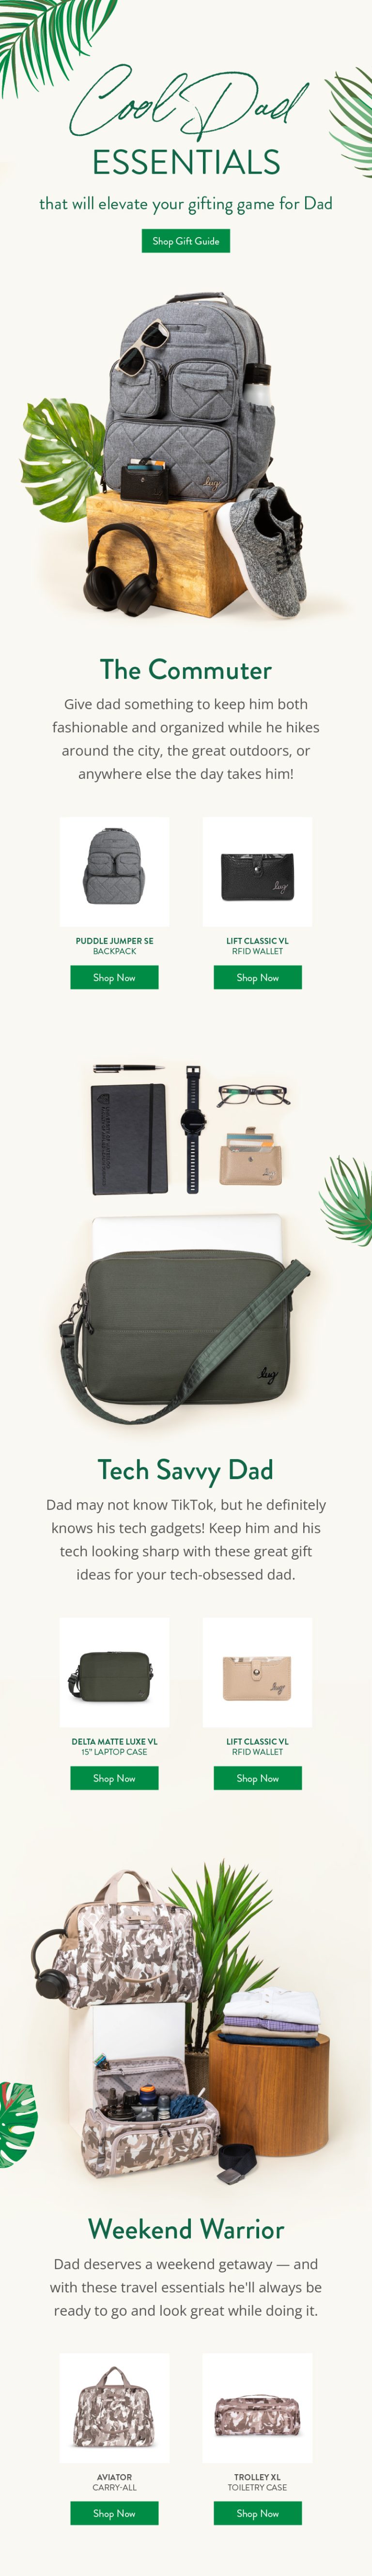 Lug Father's Day Email